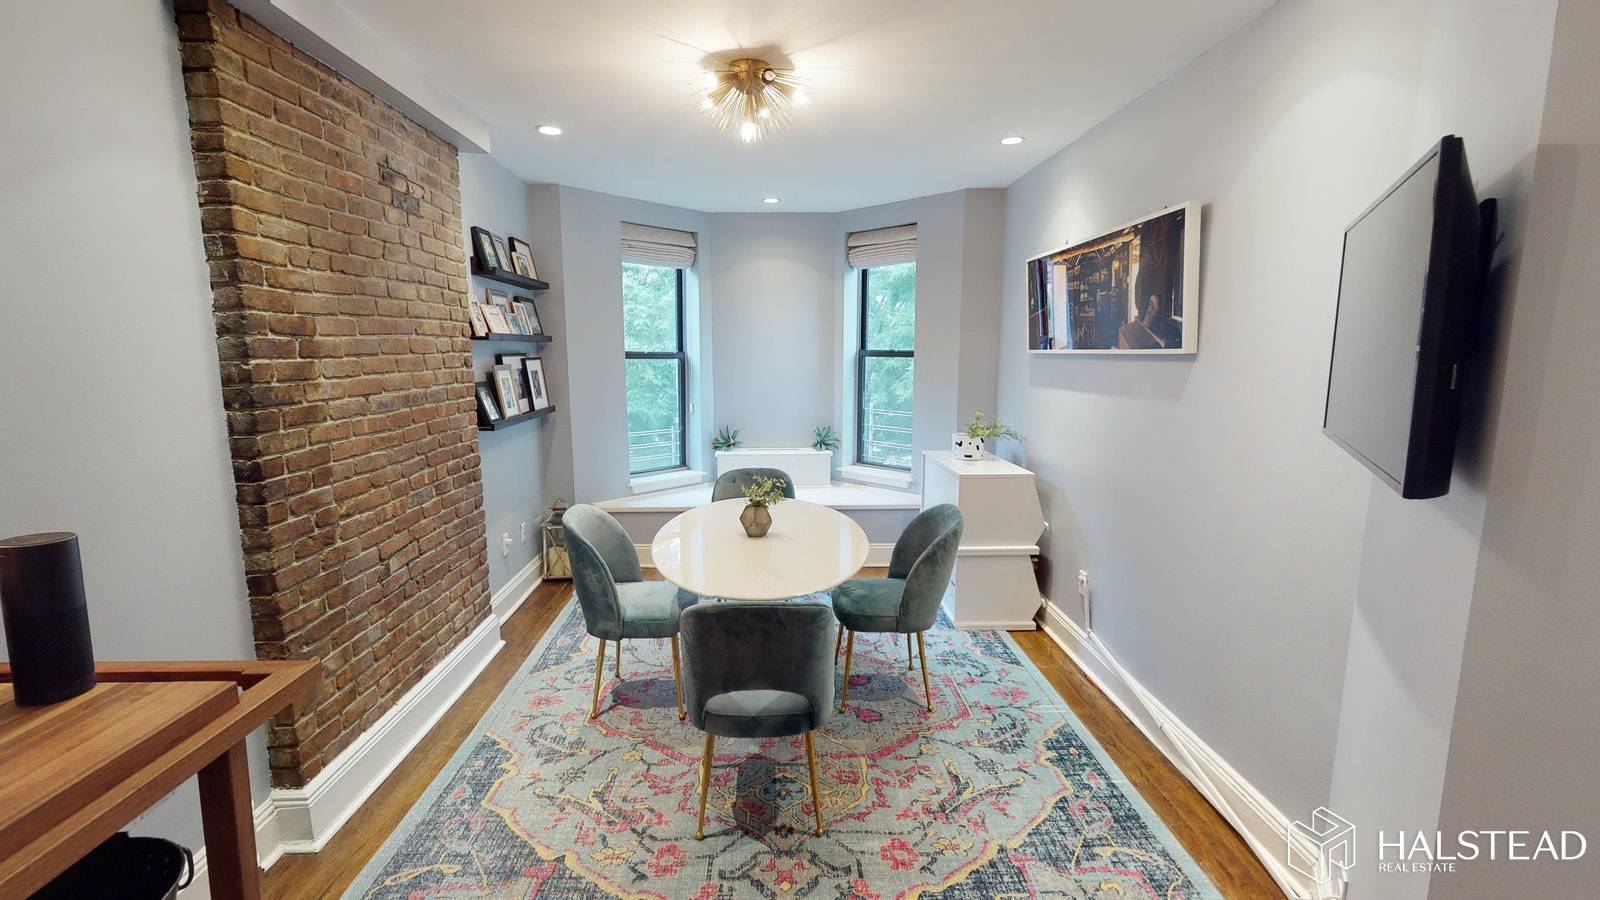 Rarely available Duplex Penthouse with private terrace in the heart of Cobble Hill.